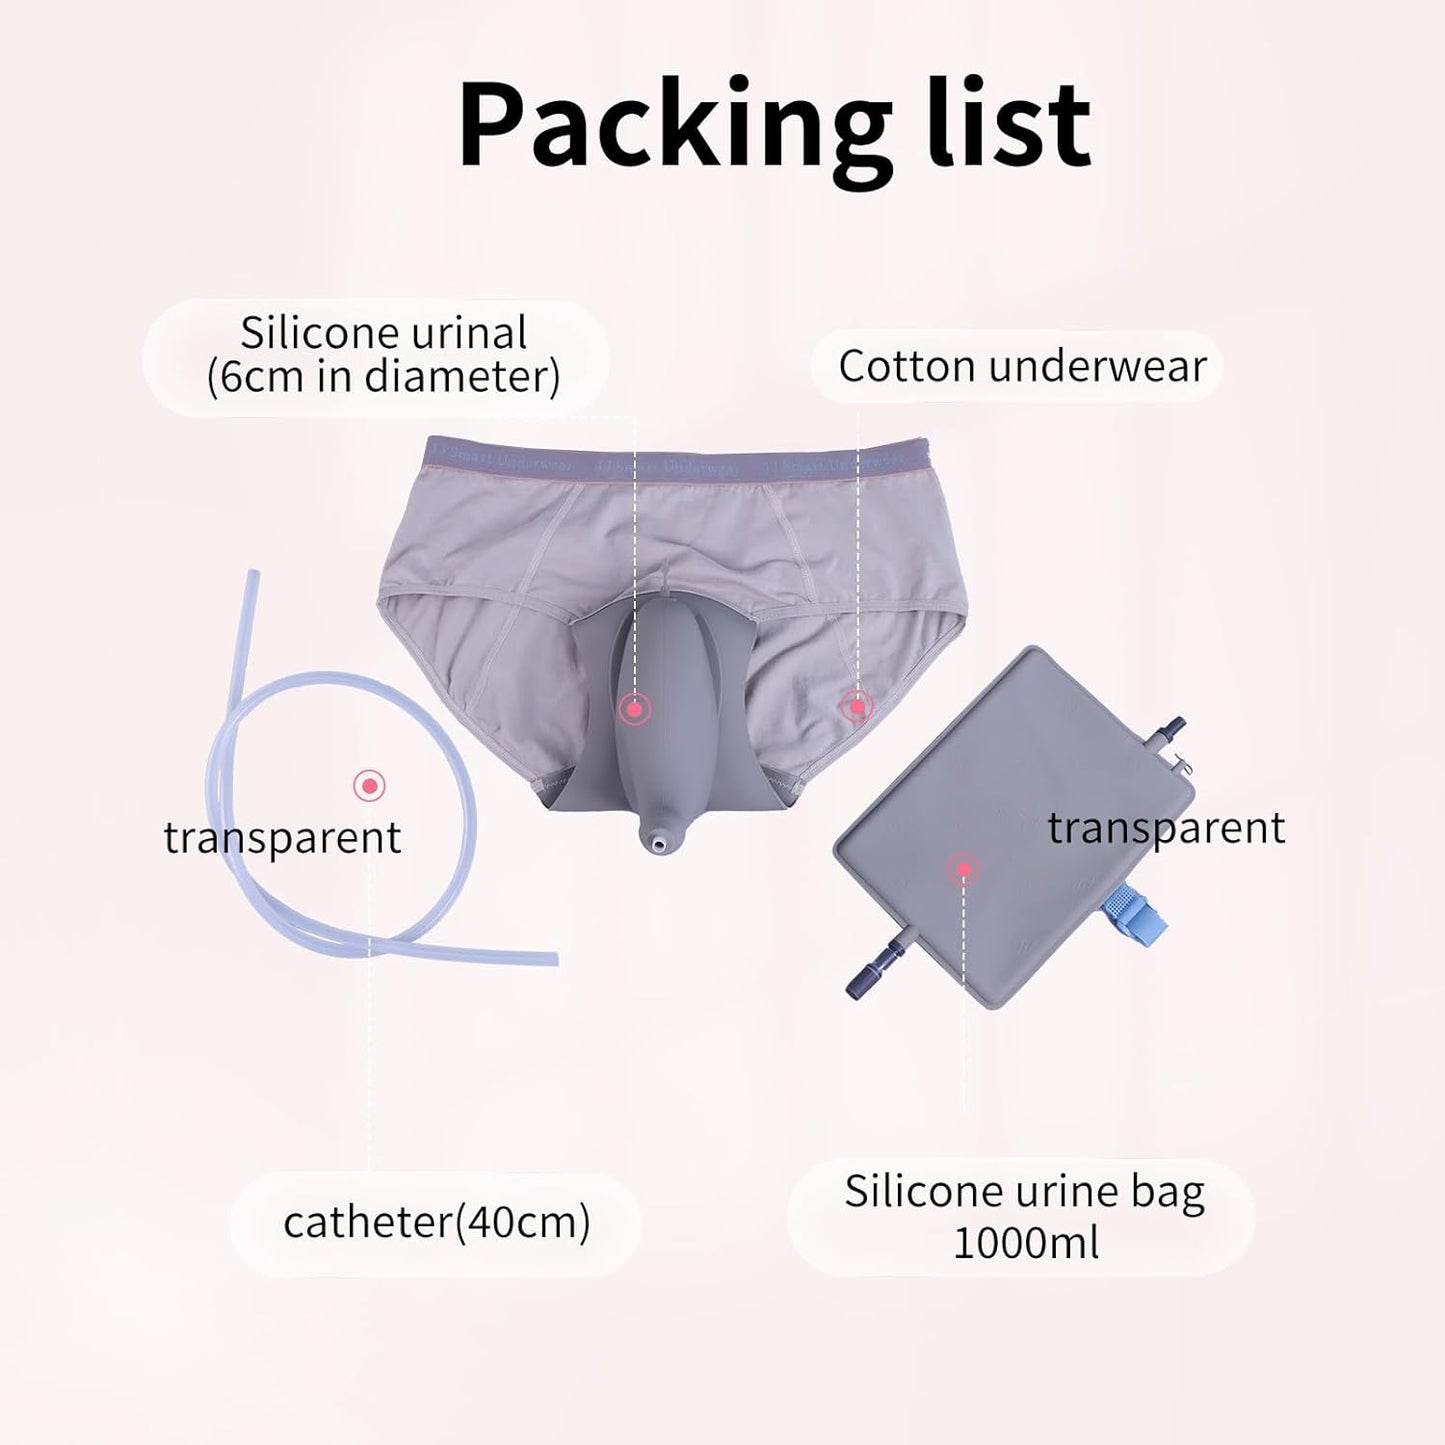 [JJ SMART] 🔥HOT SALE🔥 Men's anti-leakage convenience pants are functional  underwear suitable for the elderly and people with urinary incontinence to